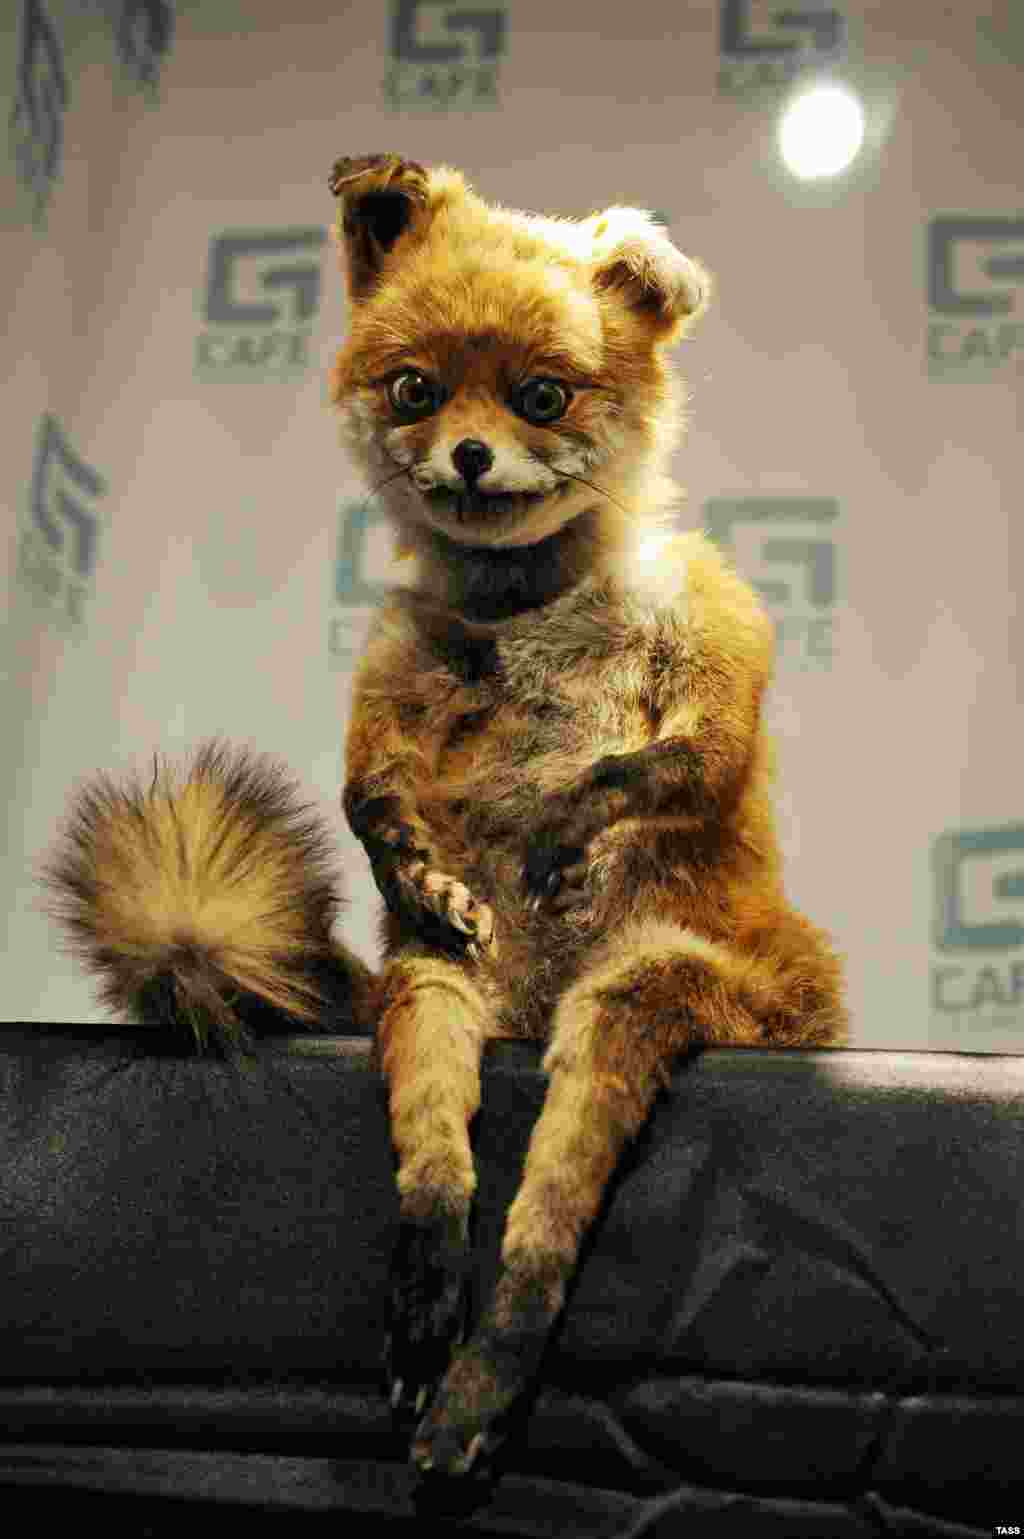 A stuffed fox created by Adele Morse, a British artist and taxidermist, appears at an exhibition in St. Petersburg. The fox, which sports a dazed look and sits in a humanlike pose, has become a celebrity in Russia. Numerous images of the fox Photoshopped in various scenes have appeared on social networking sites. (ITAR-TASS/Ruslan Shamukov)